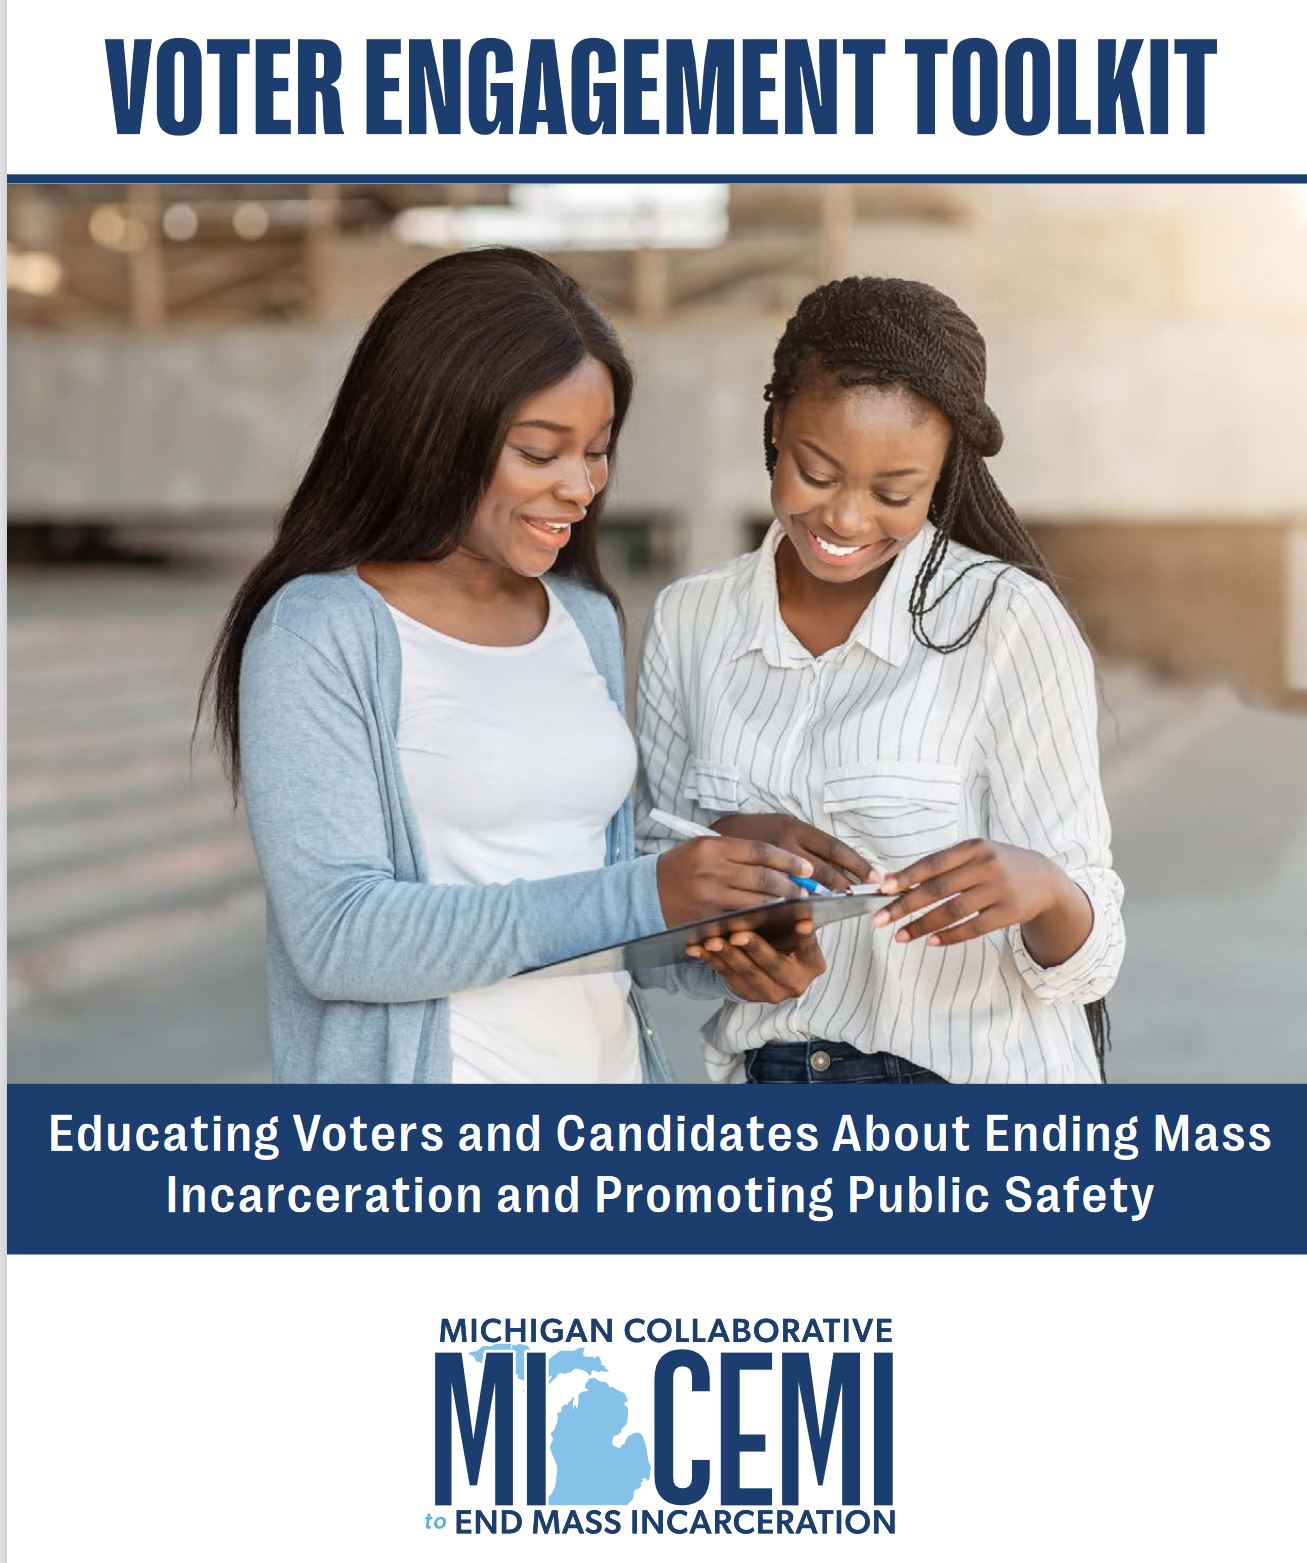 MI-CEMI Voter Engagement Tool Kit Available